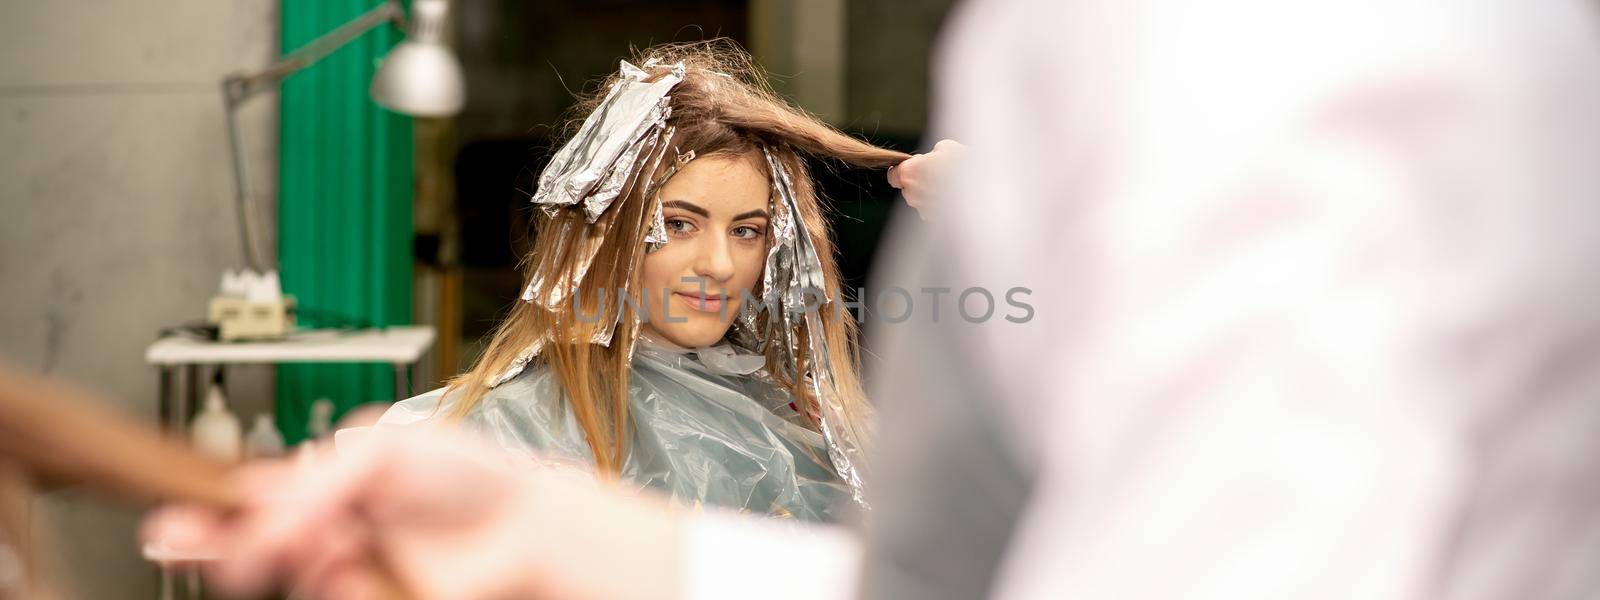 Portrait of a beautiful young caucasian woman who is smiling getting dyeing her hair with foil in a beauty salon. by okskukuruza